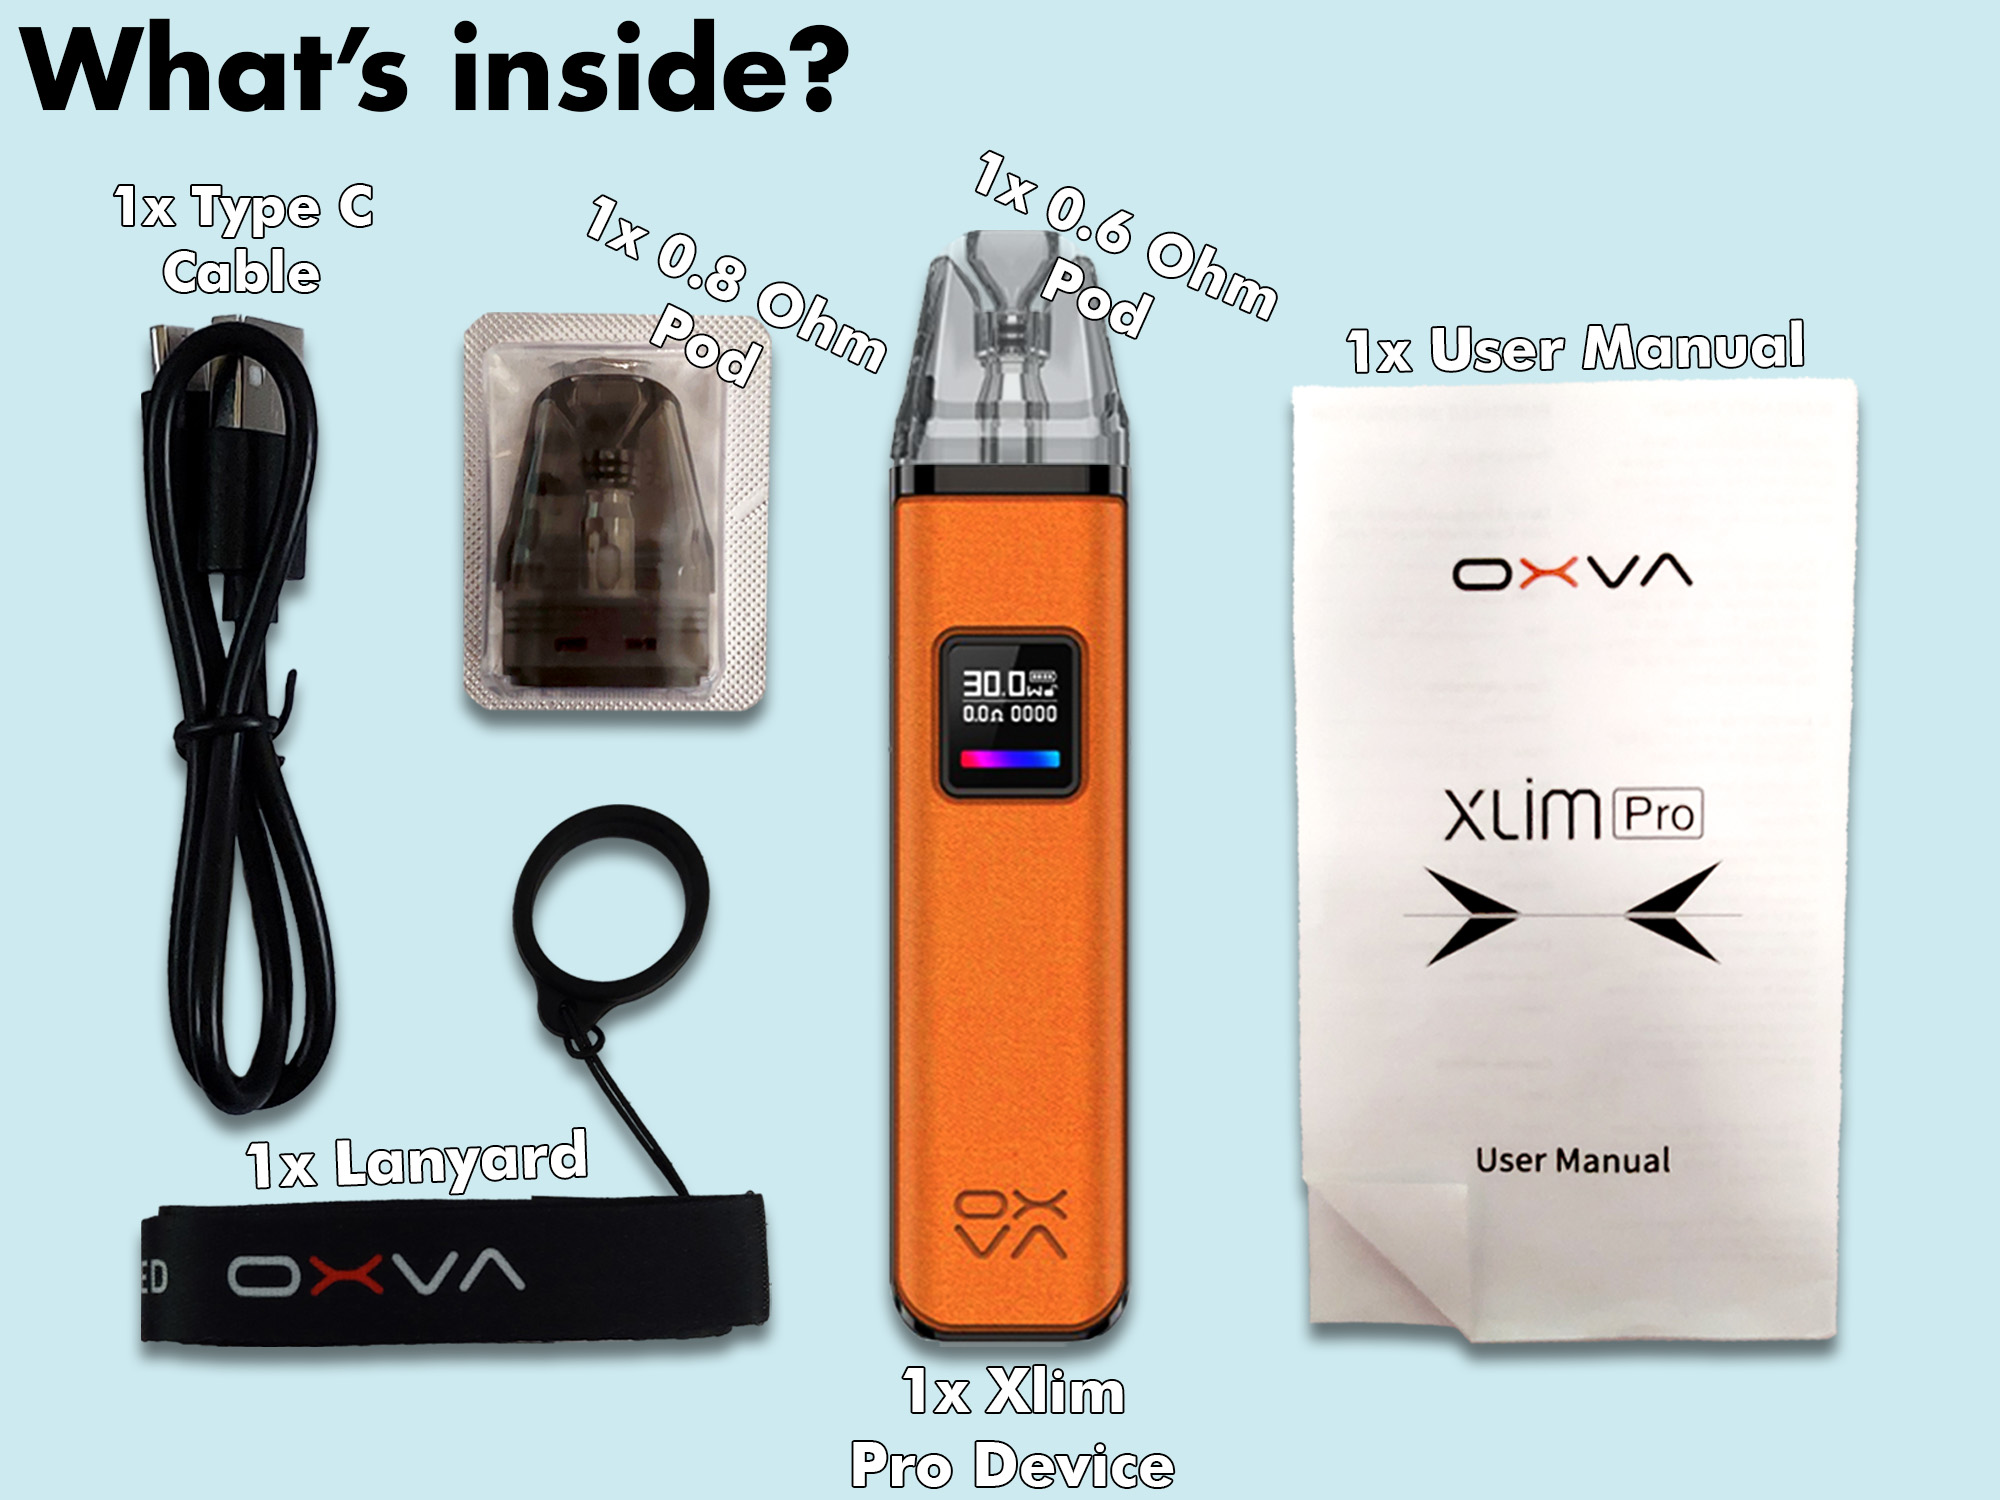 Oxva Xlim Pro vape pod kit an image showing the contents of the box and whats inside